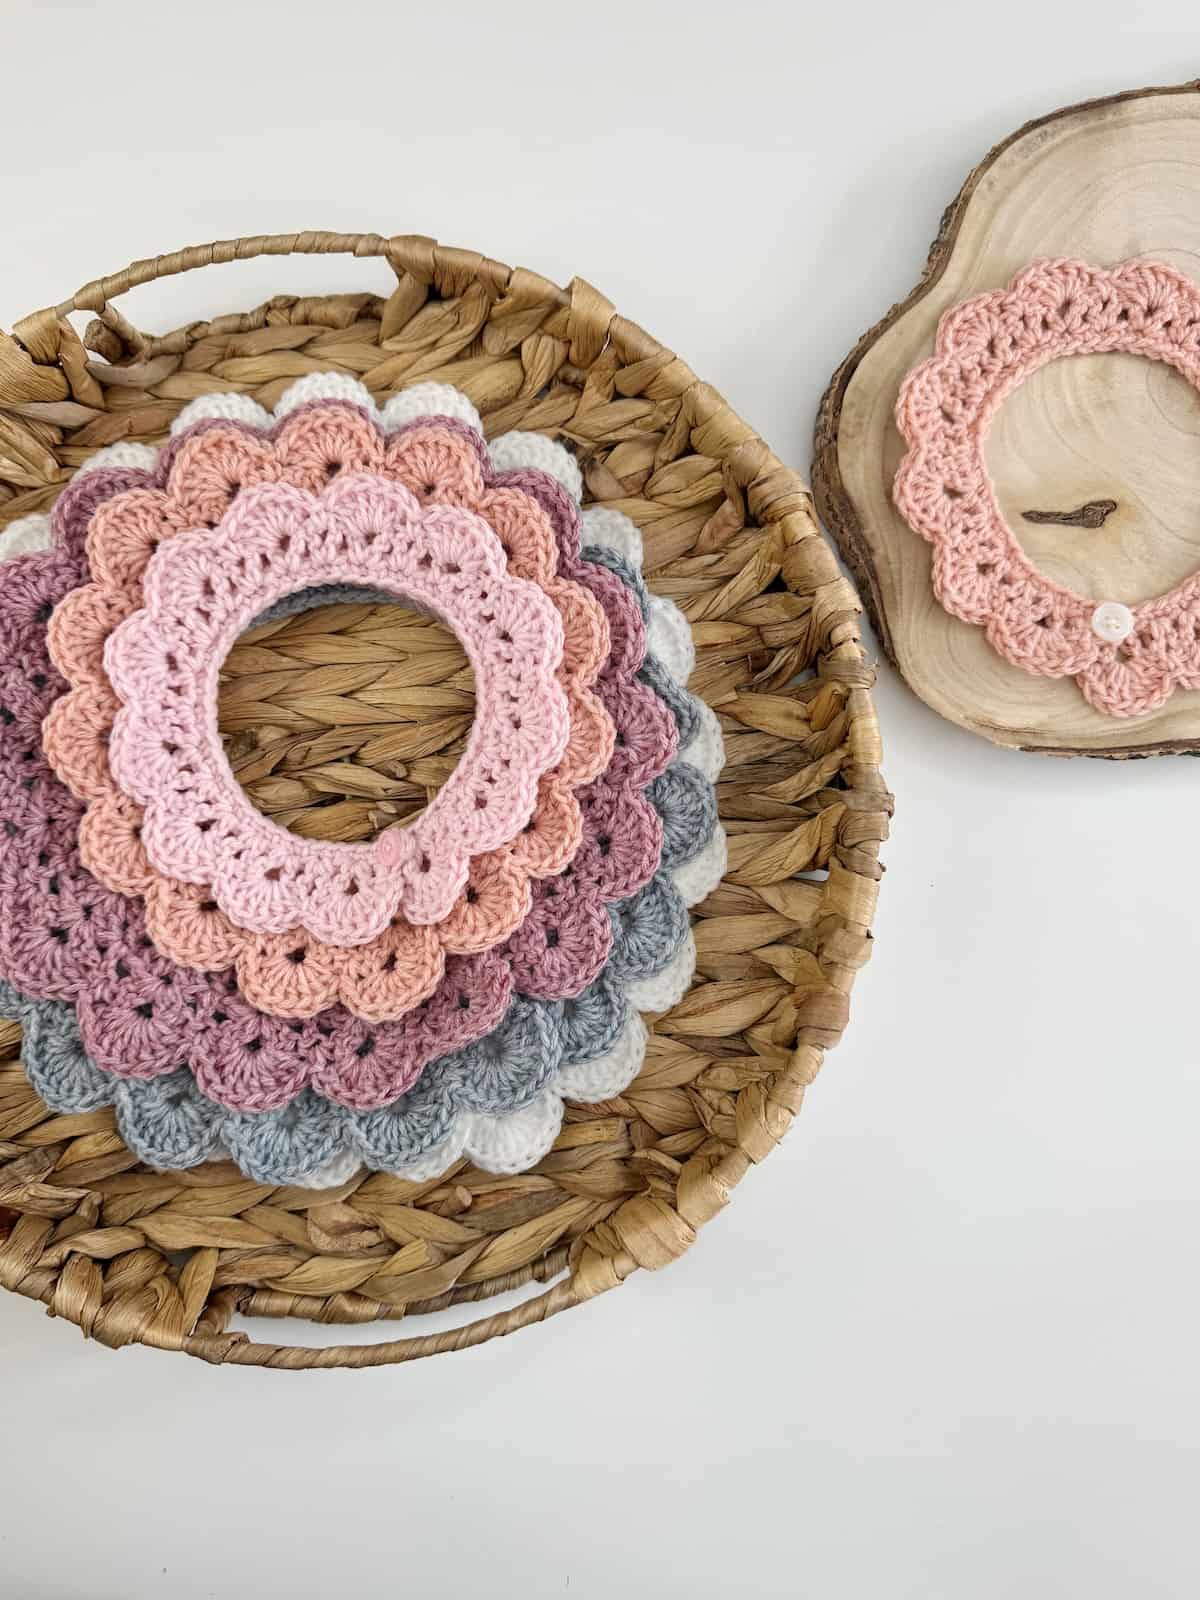 A pile of crocheted collars in a basket on top of a wooden table.